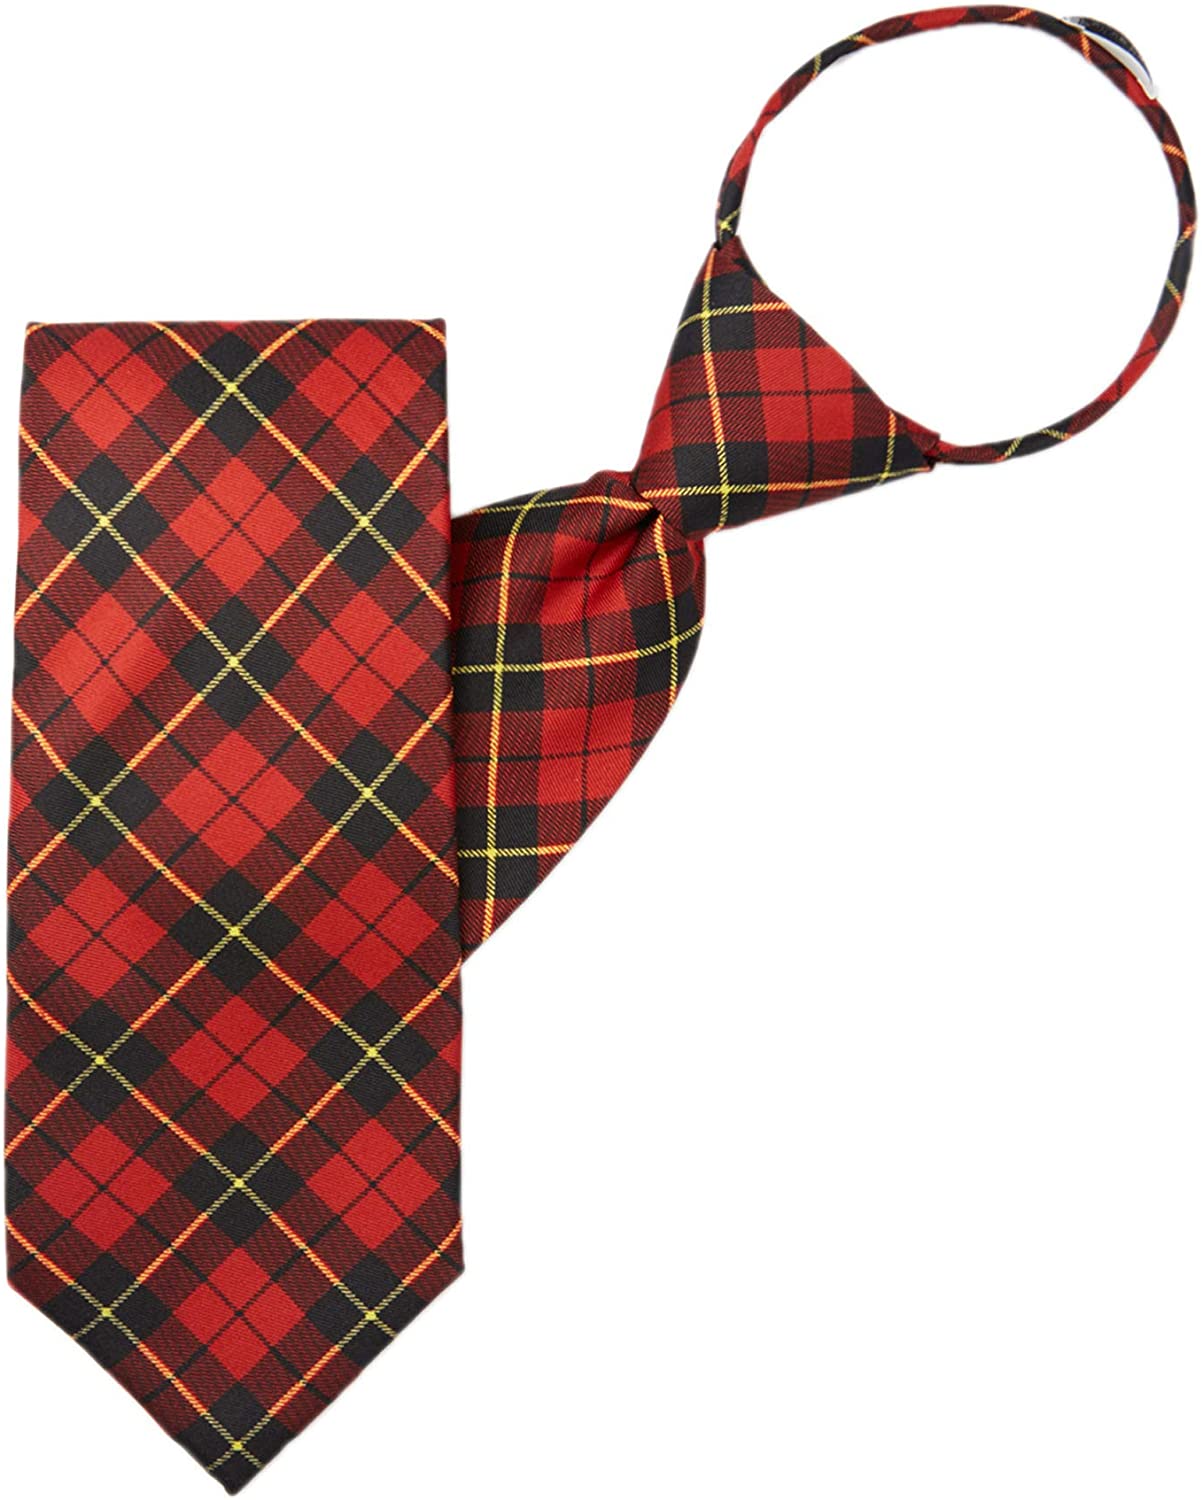 50 New Quality Tartans Tartan Bow Tie 100% Pure Wool Made in Scotland 